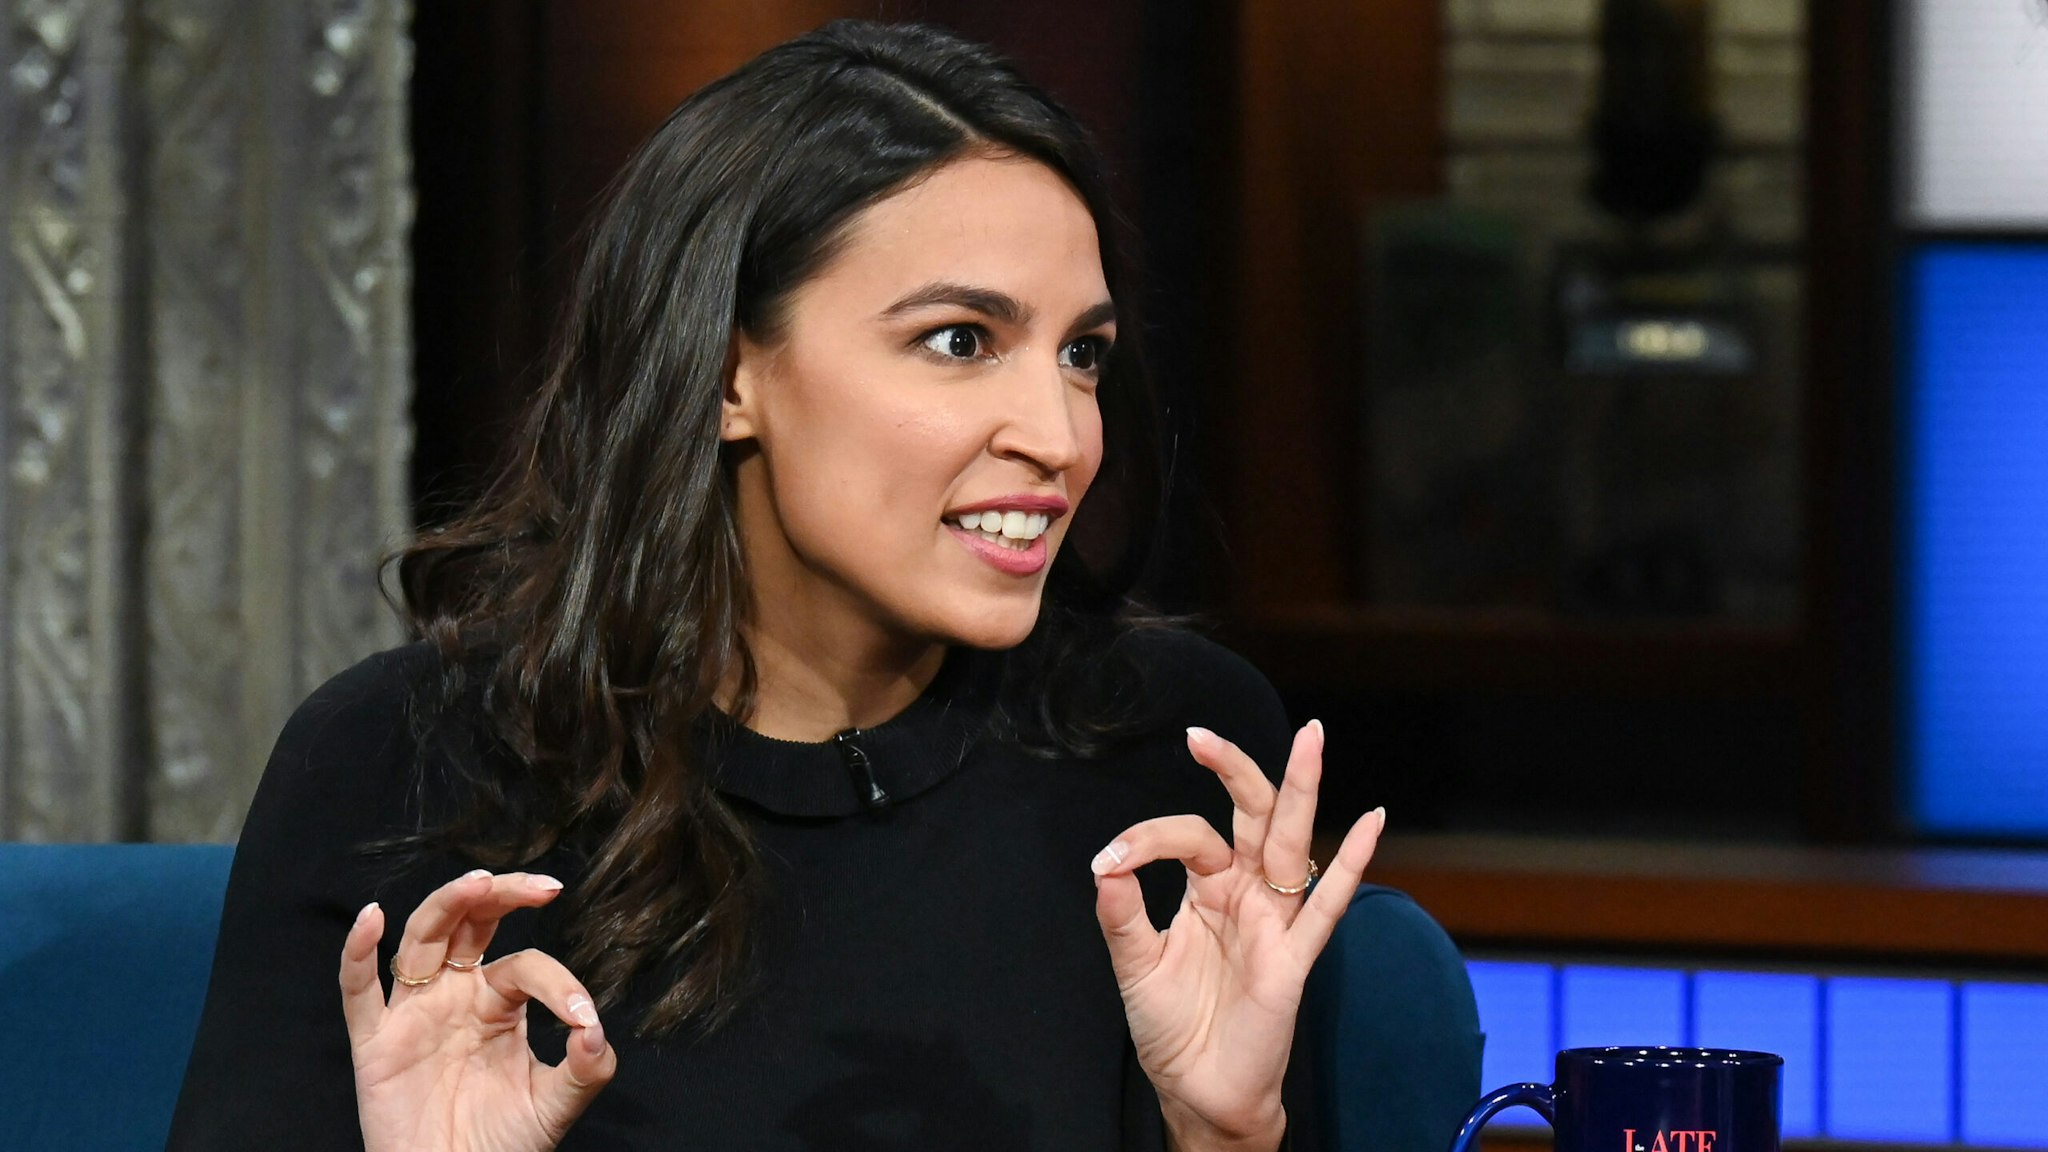 NEW YORK - JUNE 28: The Late Show with Stephen Colbert and guest Rep. Alexandria Ocasio-Cortez during Tuesdays June 28, 2022 show.